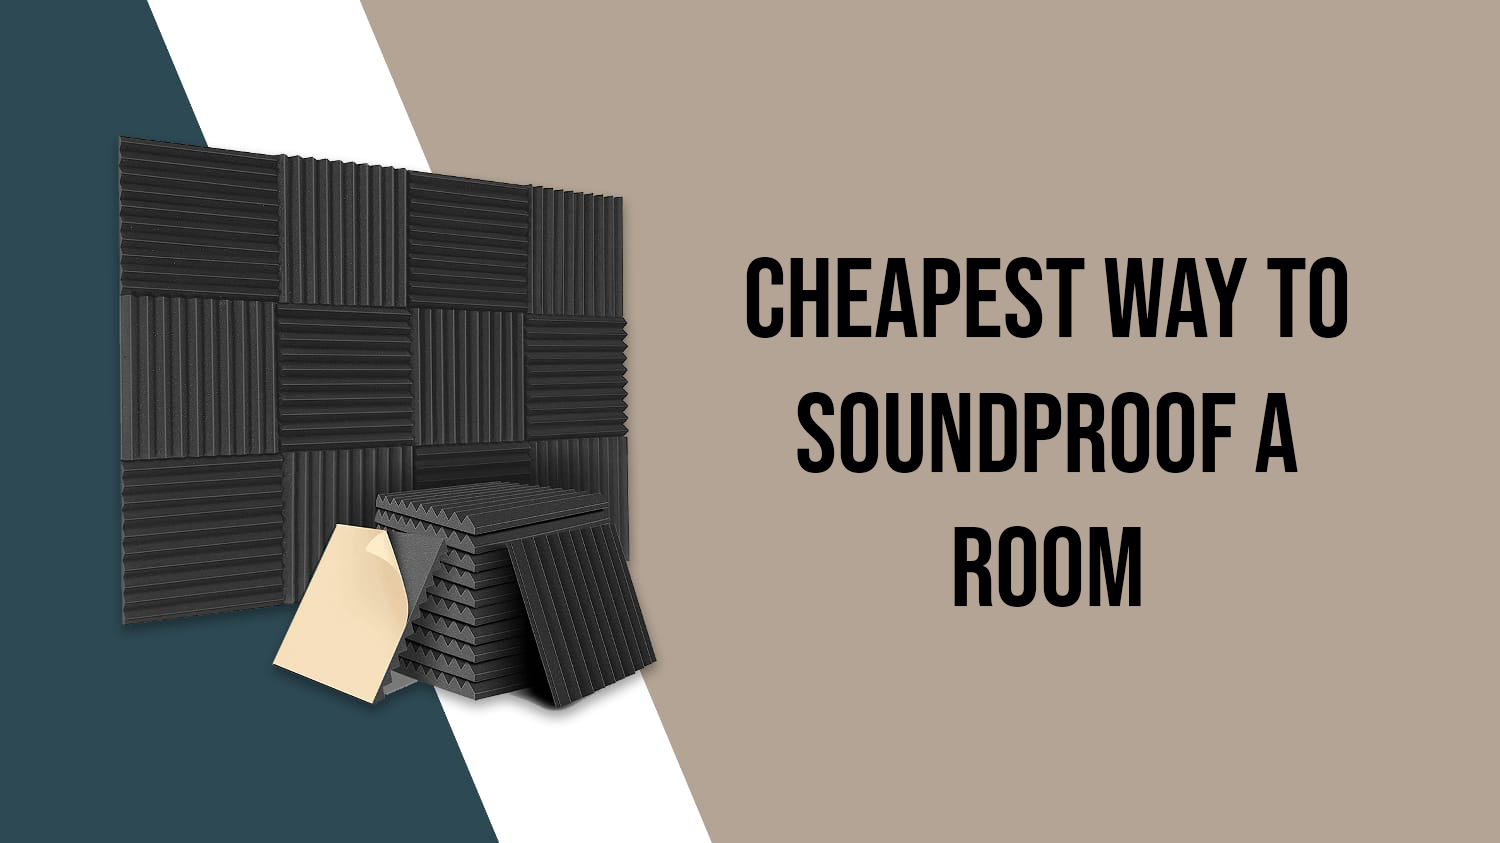 Cheapest way to soundproof a room